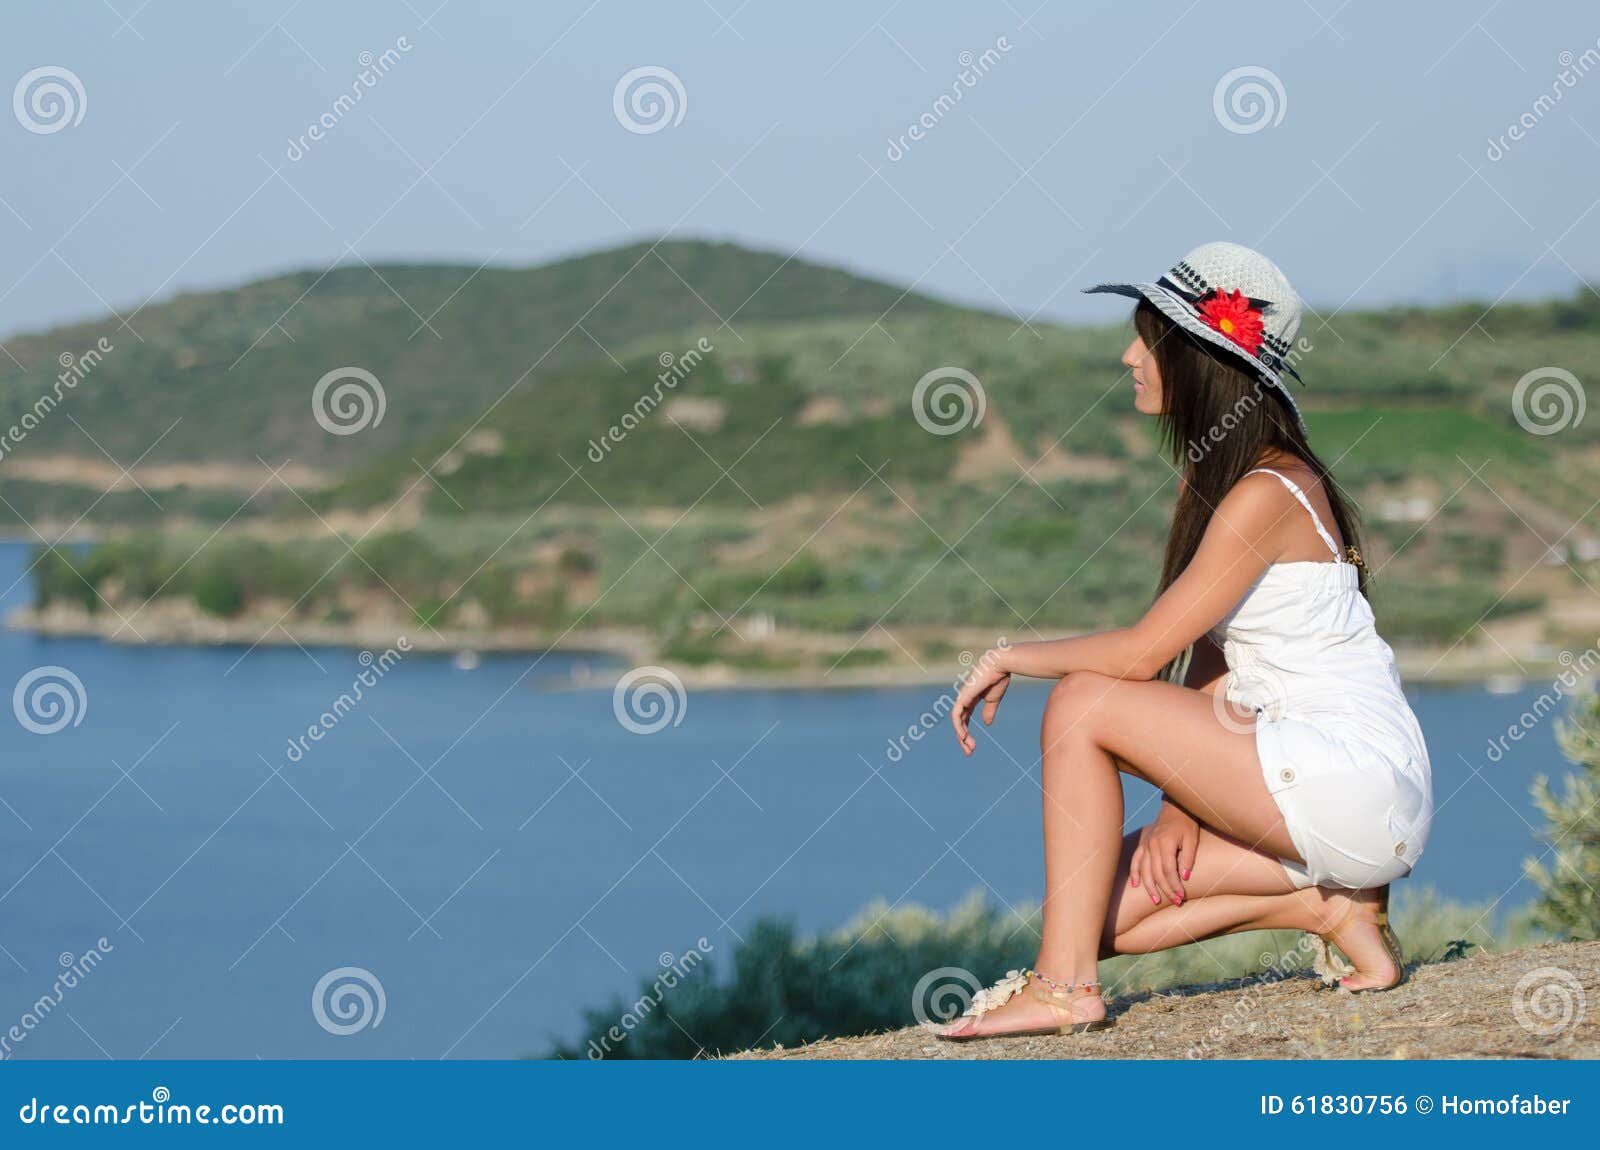 woman dressed with white coveralls rompers joying the sunny day